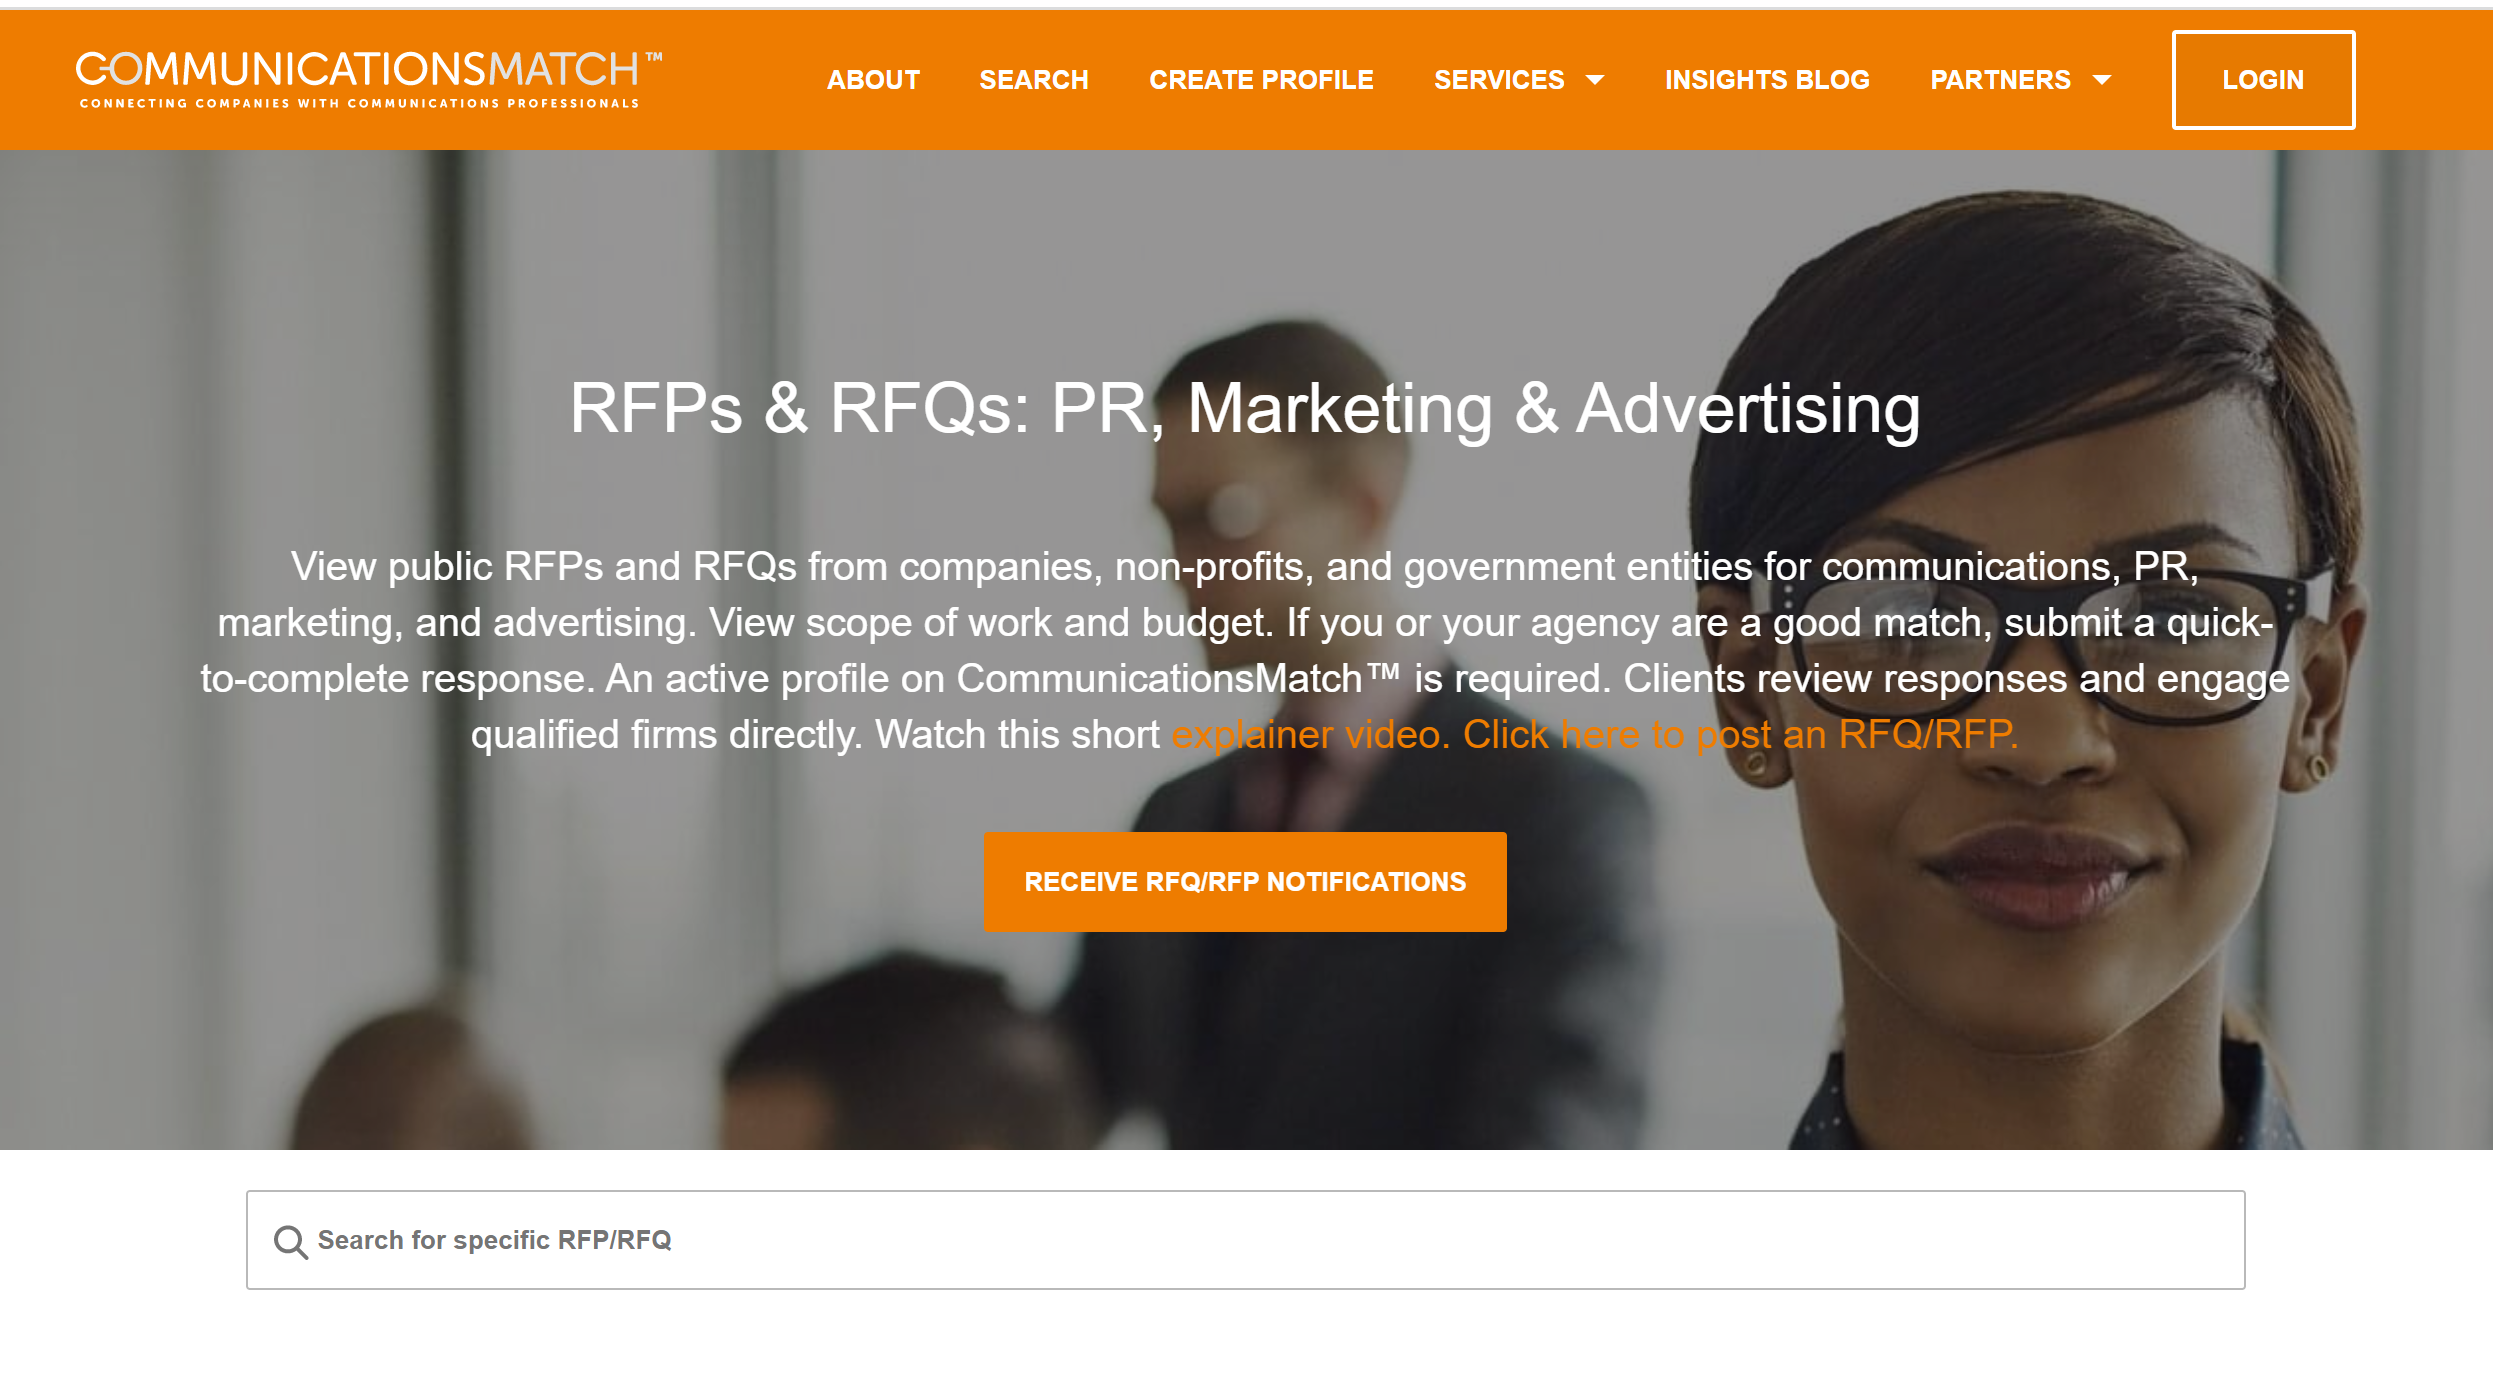 How to send an RFP to PR agencies